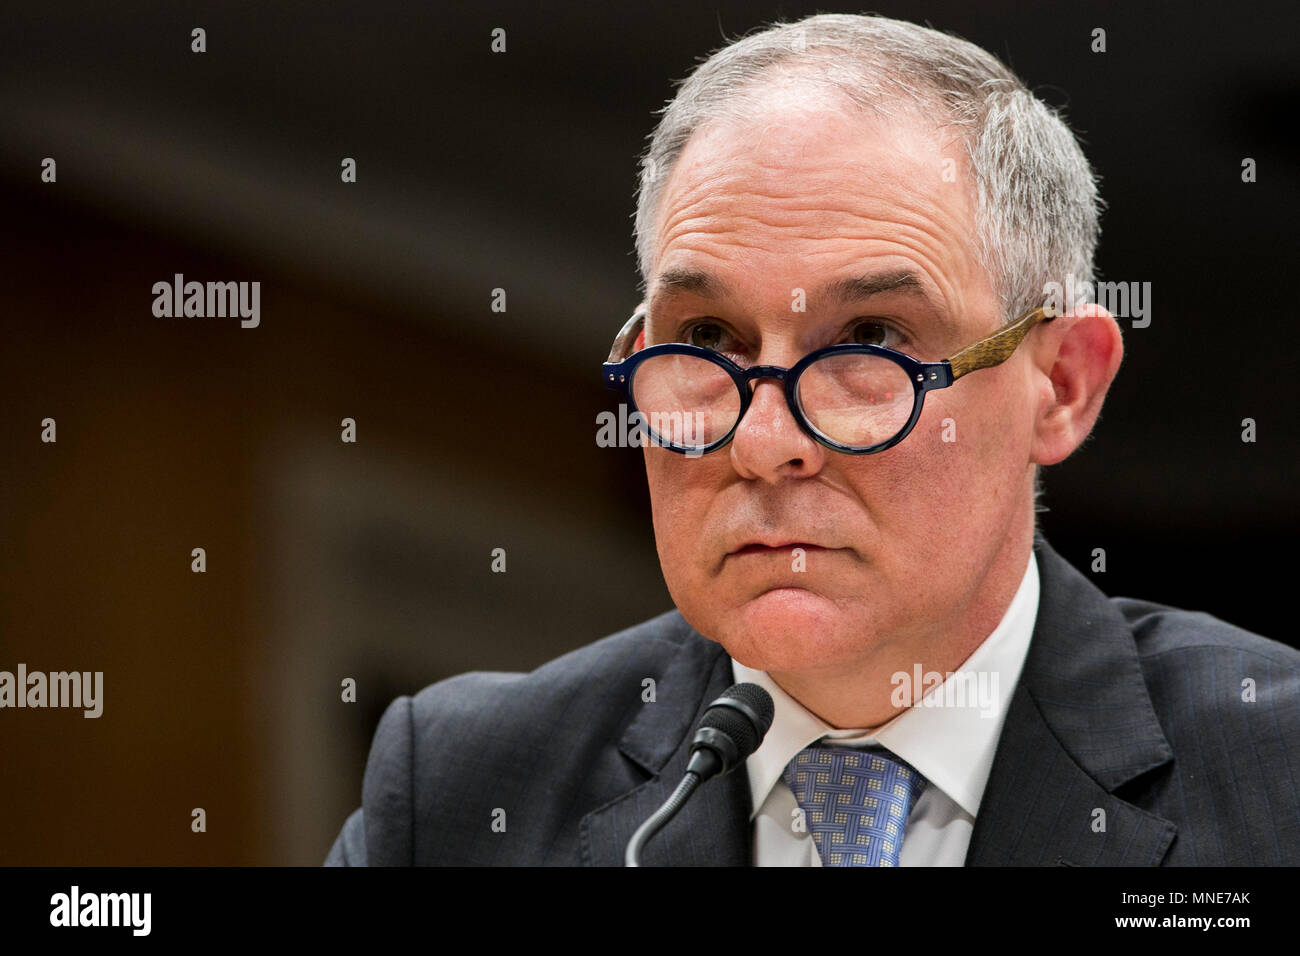 Washington DC, USA. 16th May, 2018. Scott Pruitt, Administrator of the Environmental Protection Agency (EPA), testifies before the Senate Interior, Environment and Related Agencies Appropriations Subcommittee during a hearing on the FY2019 Budget Request for the Environmental Protection Agency in Washington, D.C on May 16, 2018. Credit: Kristoffer Tripplaar/Alamy Live News Stock Photo